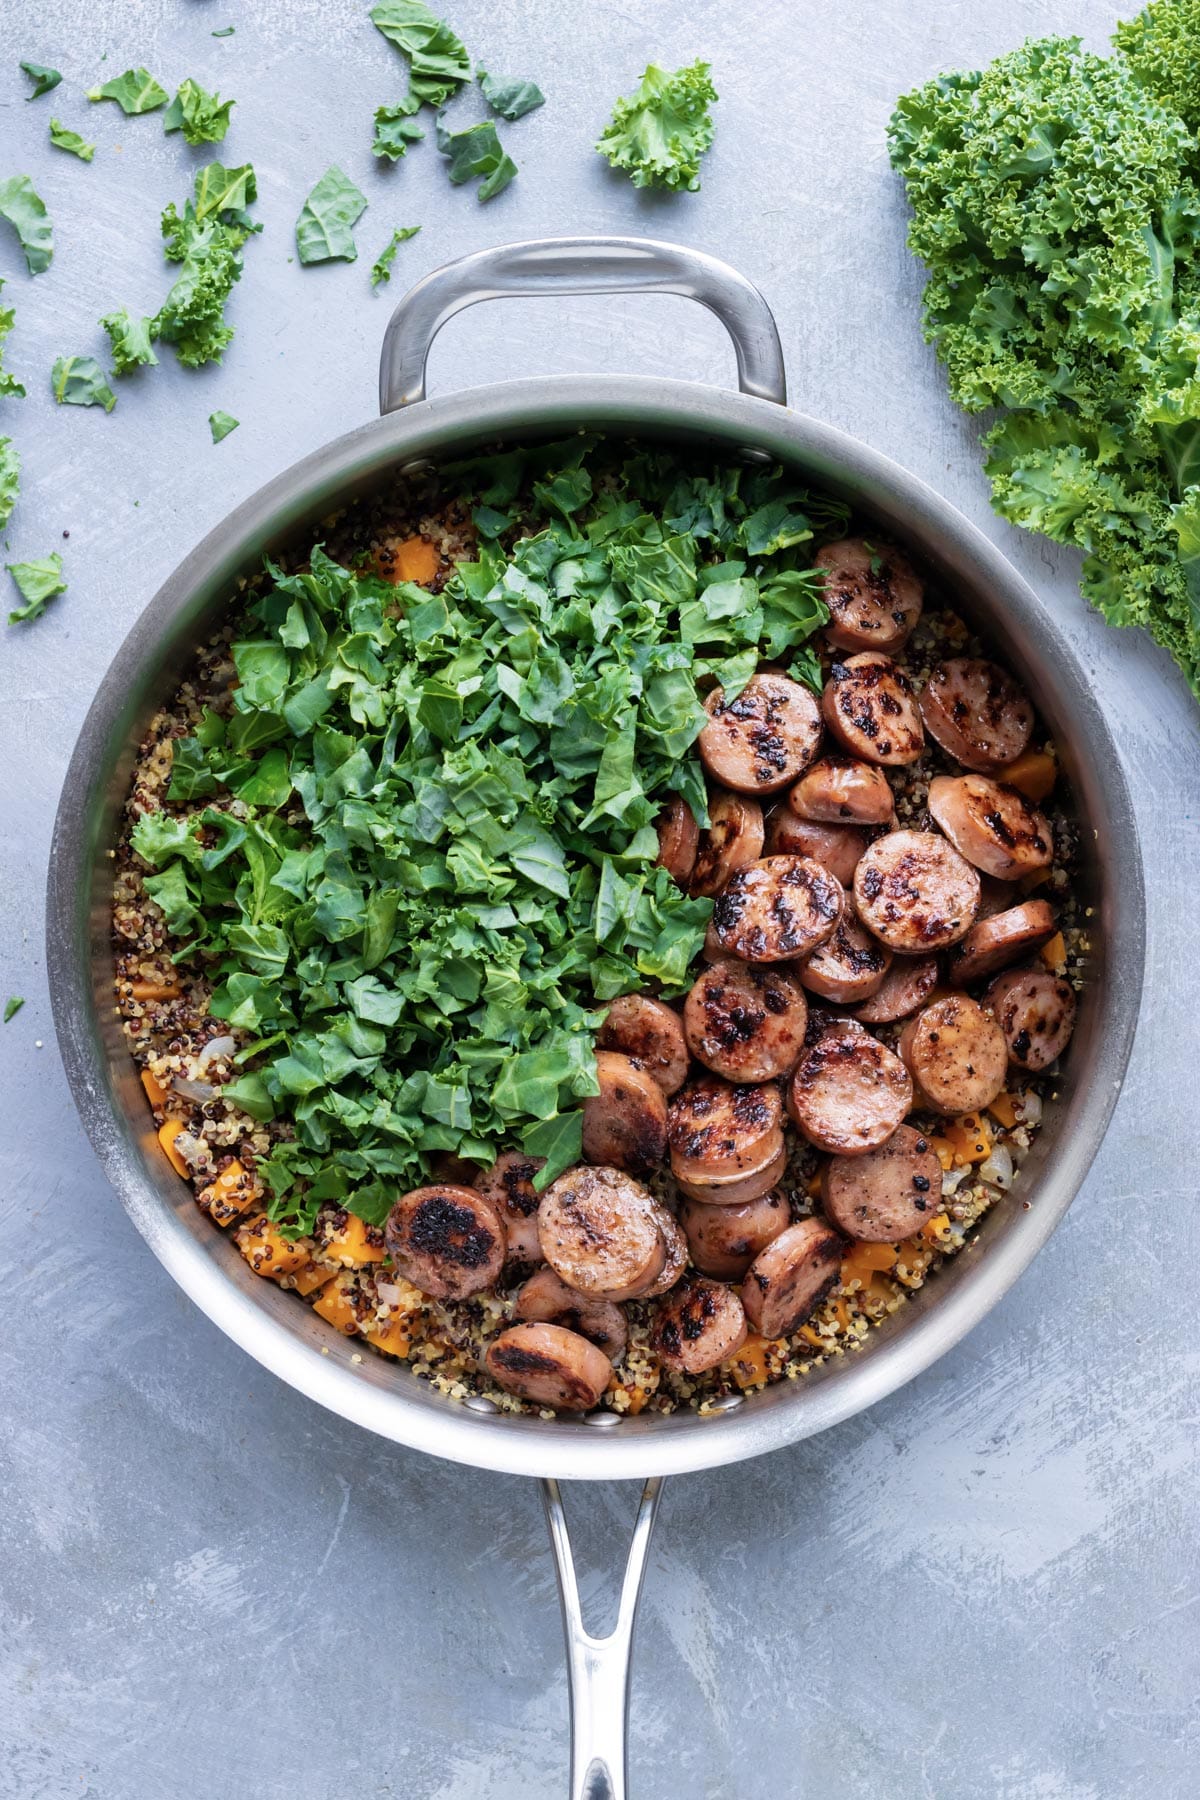 Sausage and kale are added to the sweet potato and quinoa mixture.